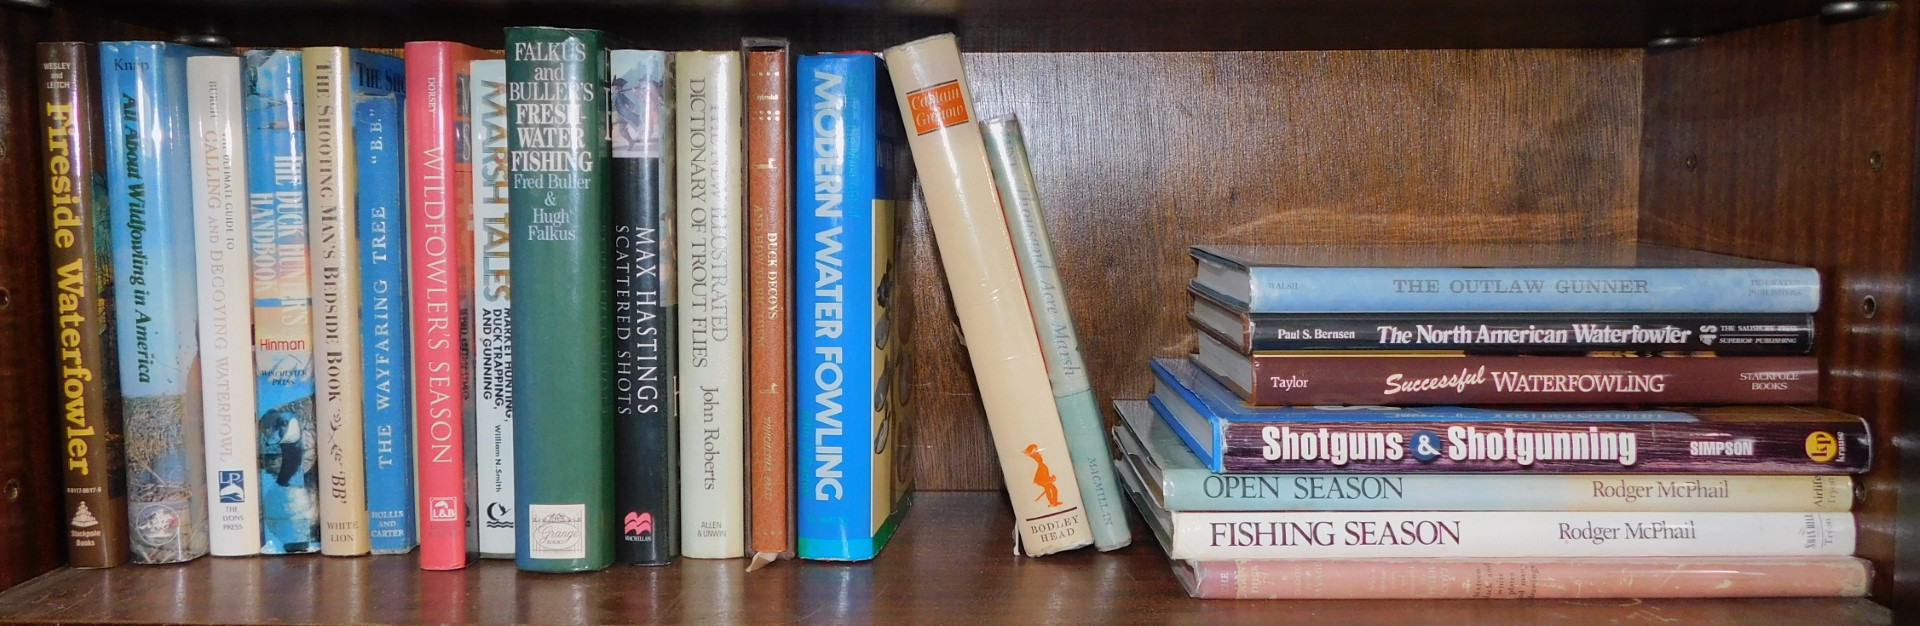 Ostensibly Wildfowling, including B B's Shooting Man's Bedside Book. (1 shelf)